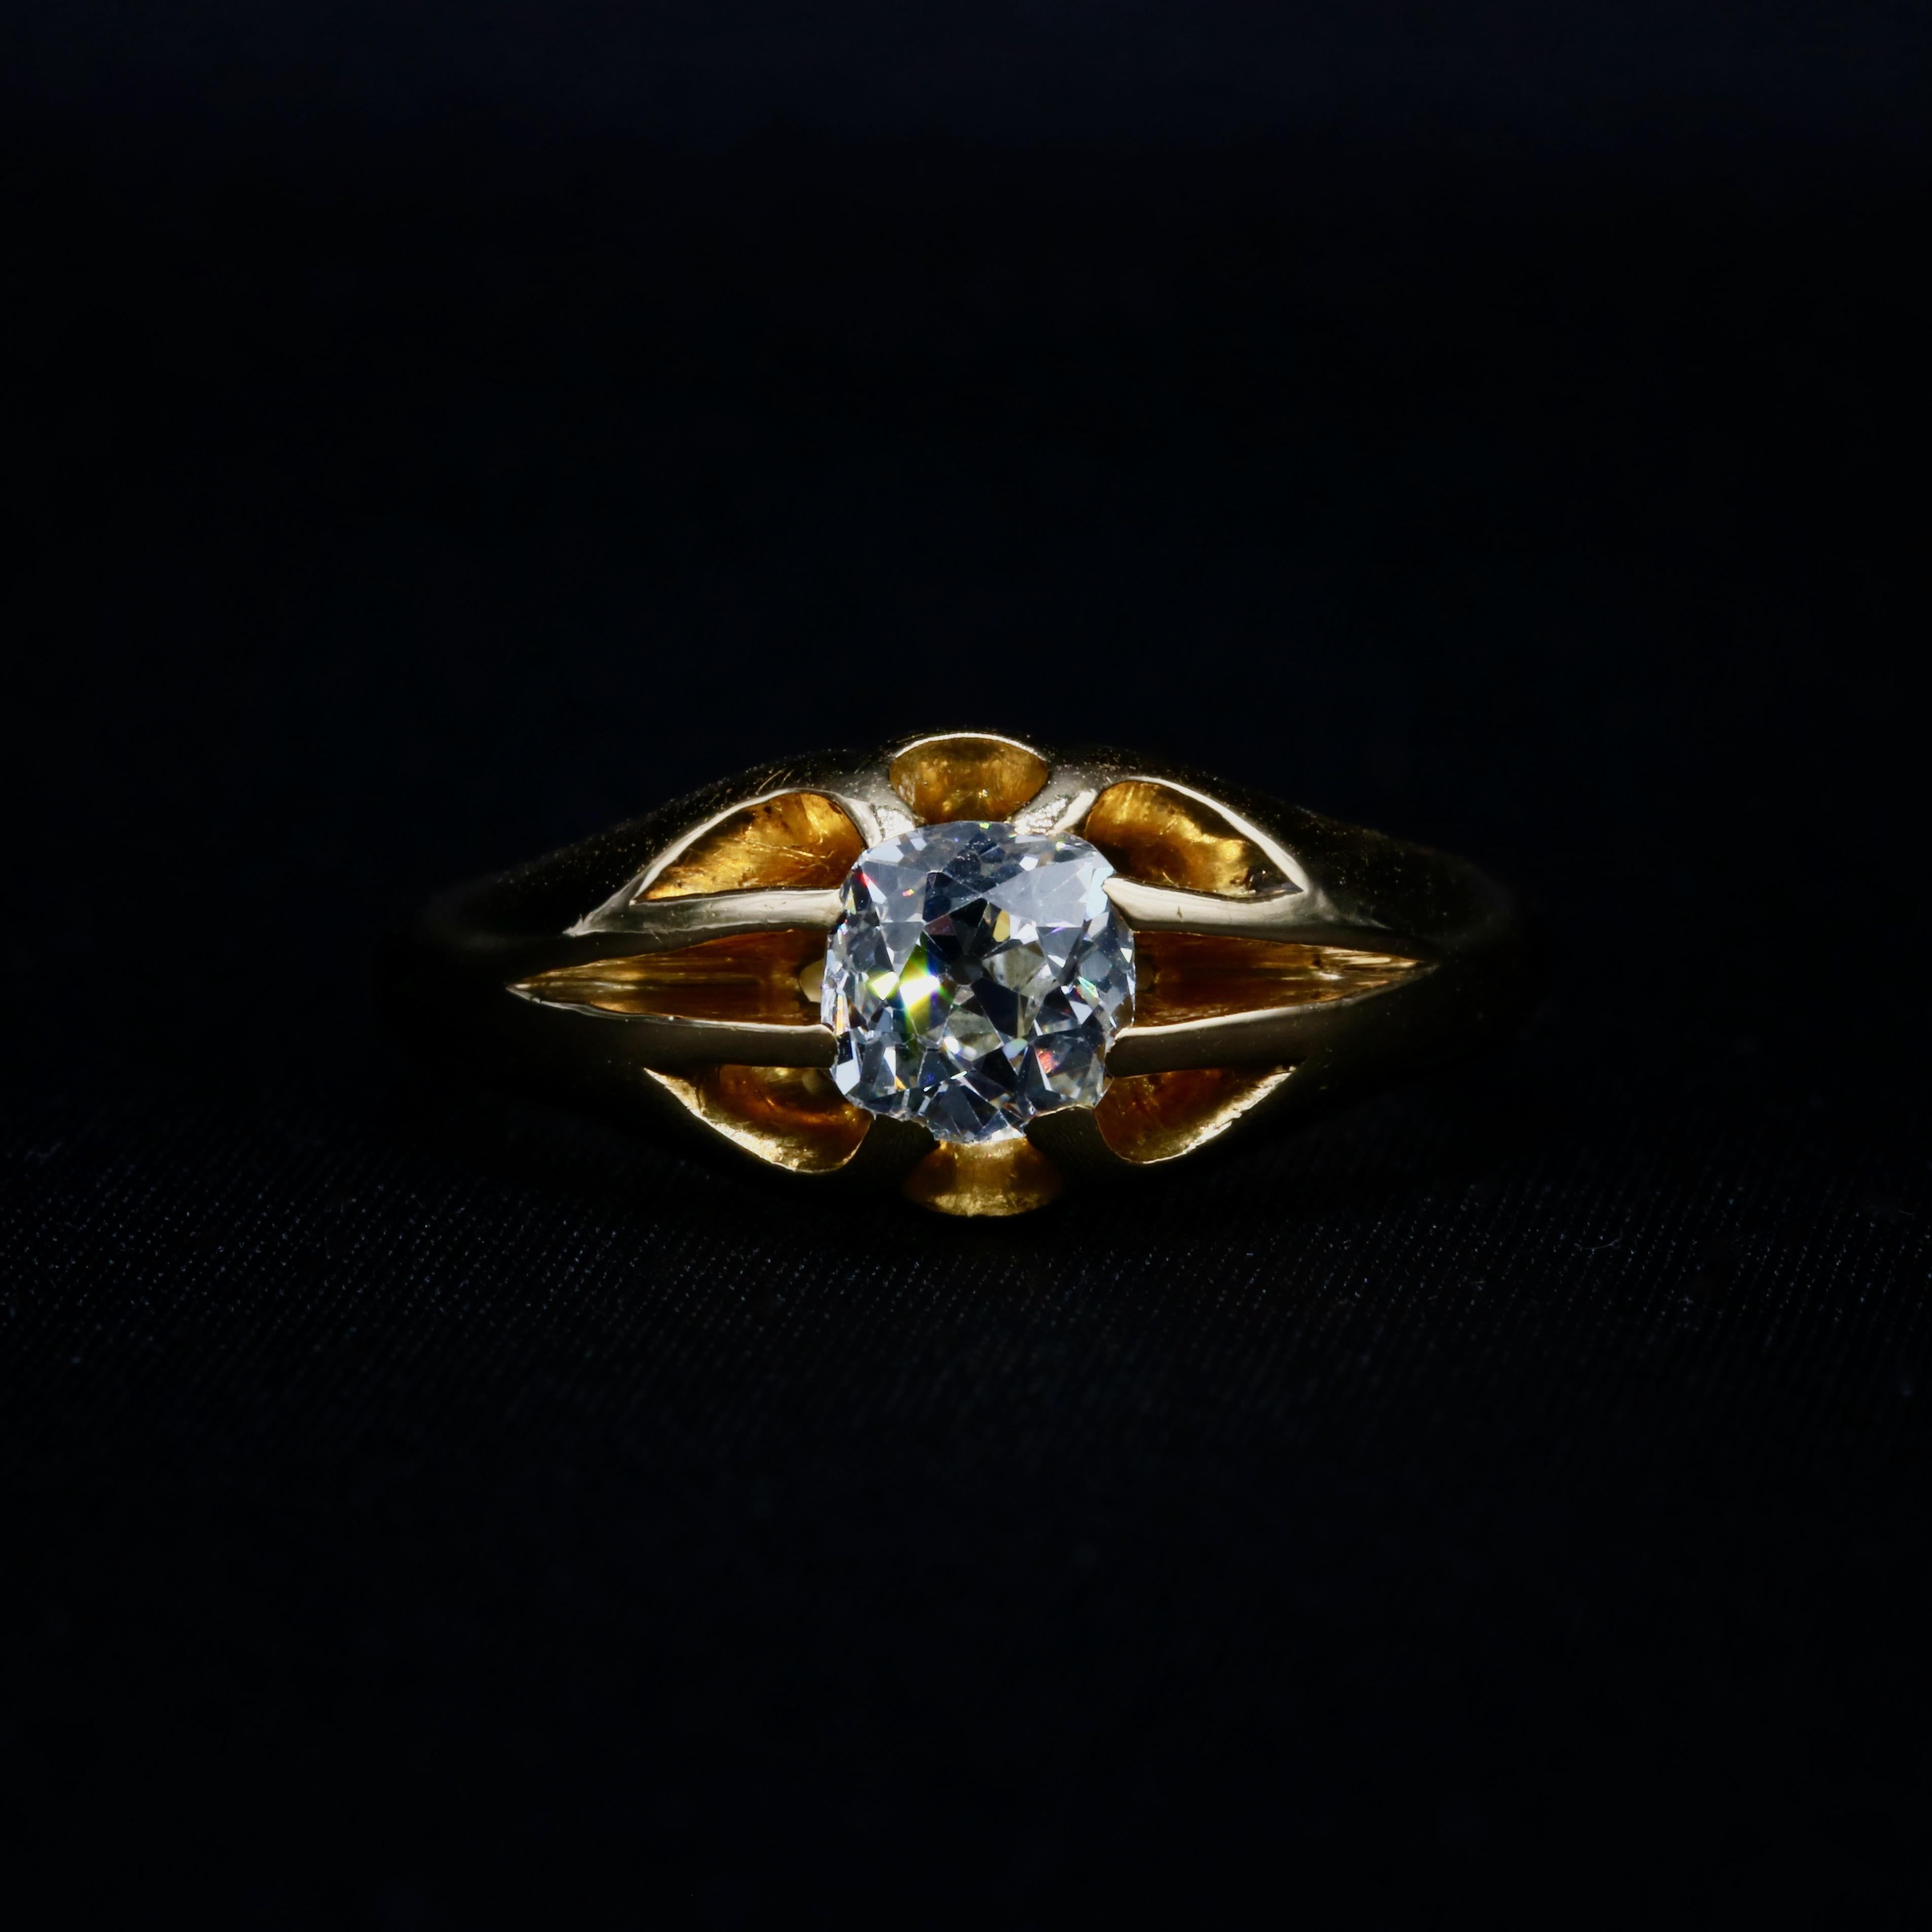 Antique Edwardian 18K Yellow Gold 0.75ct Old Mine Cut Diamond Belcher Ring For Sale 4